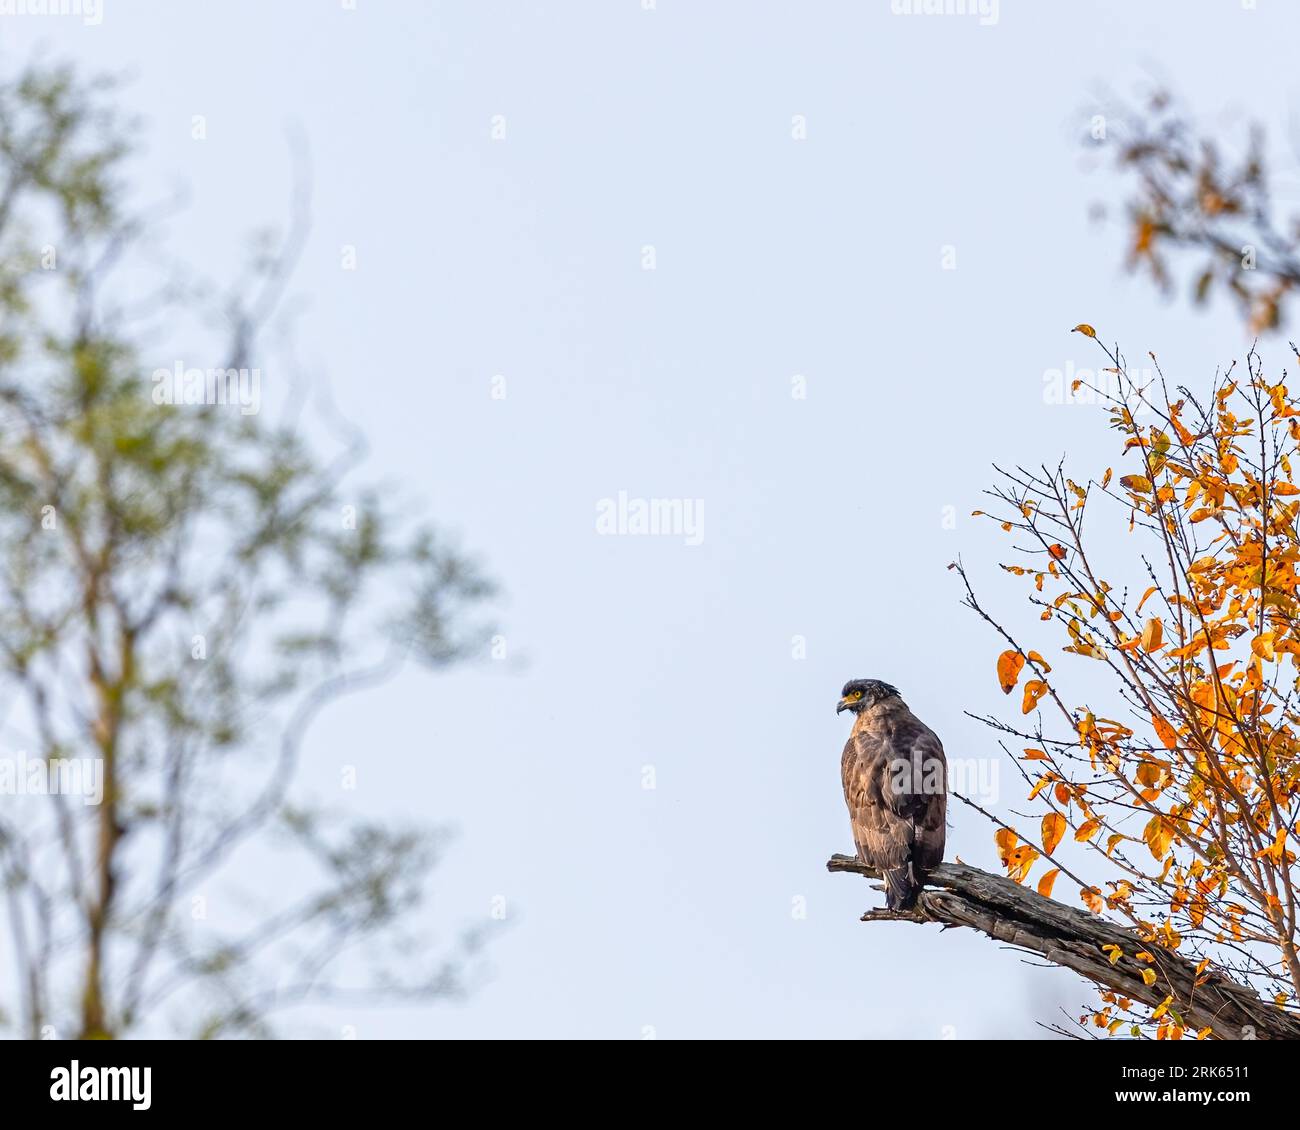 Perched atop a vibrant yellow-leaved tree branch, a hawk surveys its surroundings Stock Photo